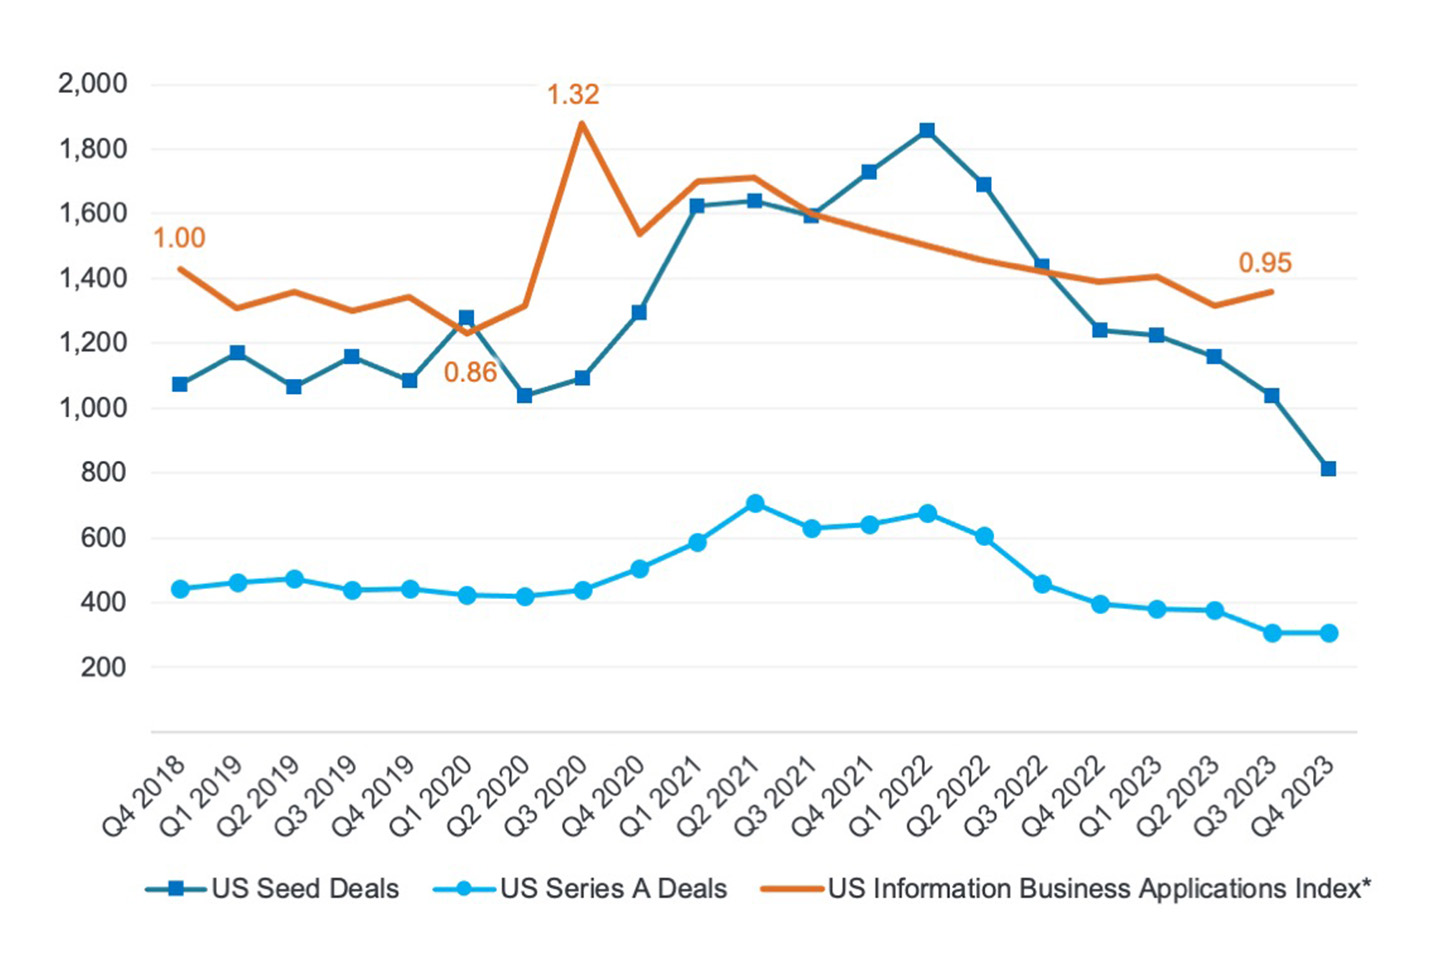 U.S. early-stage deal trends and information company formation (indexed to Q4 2018)